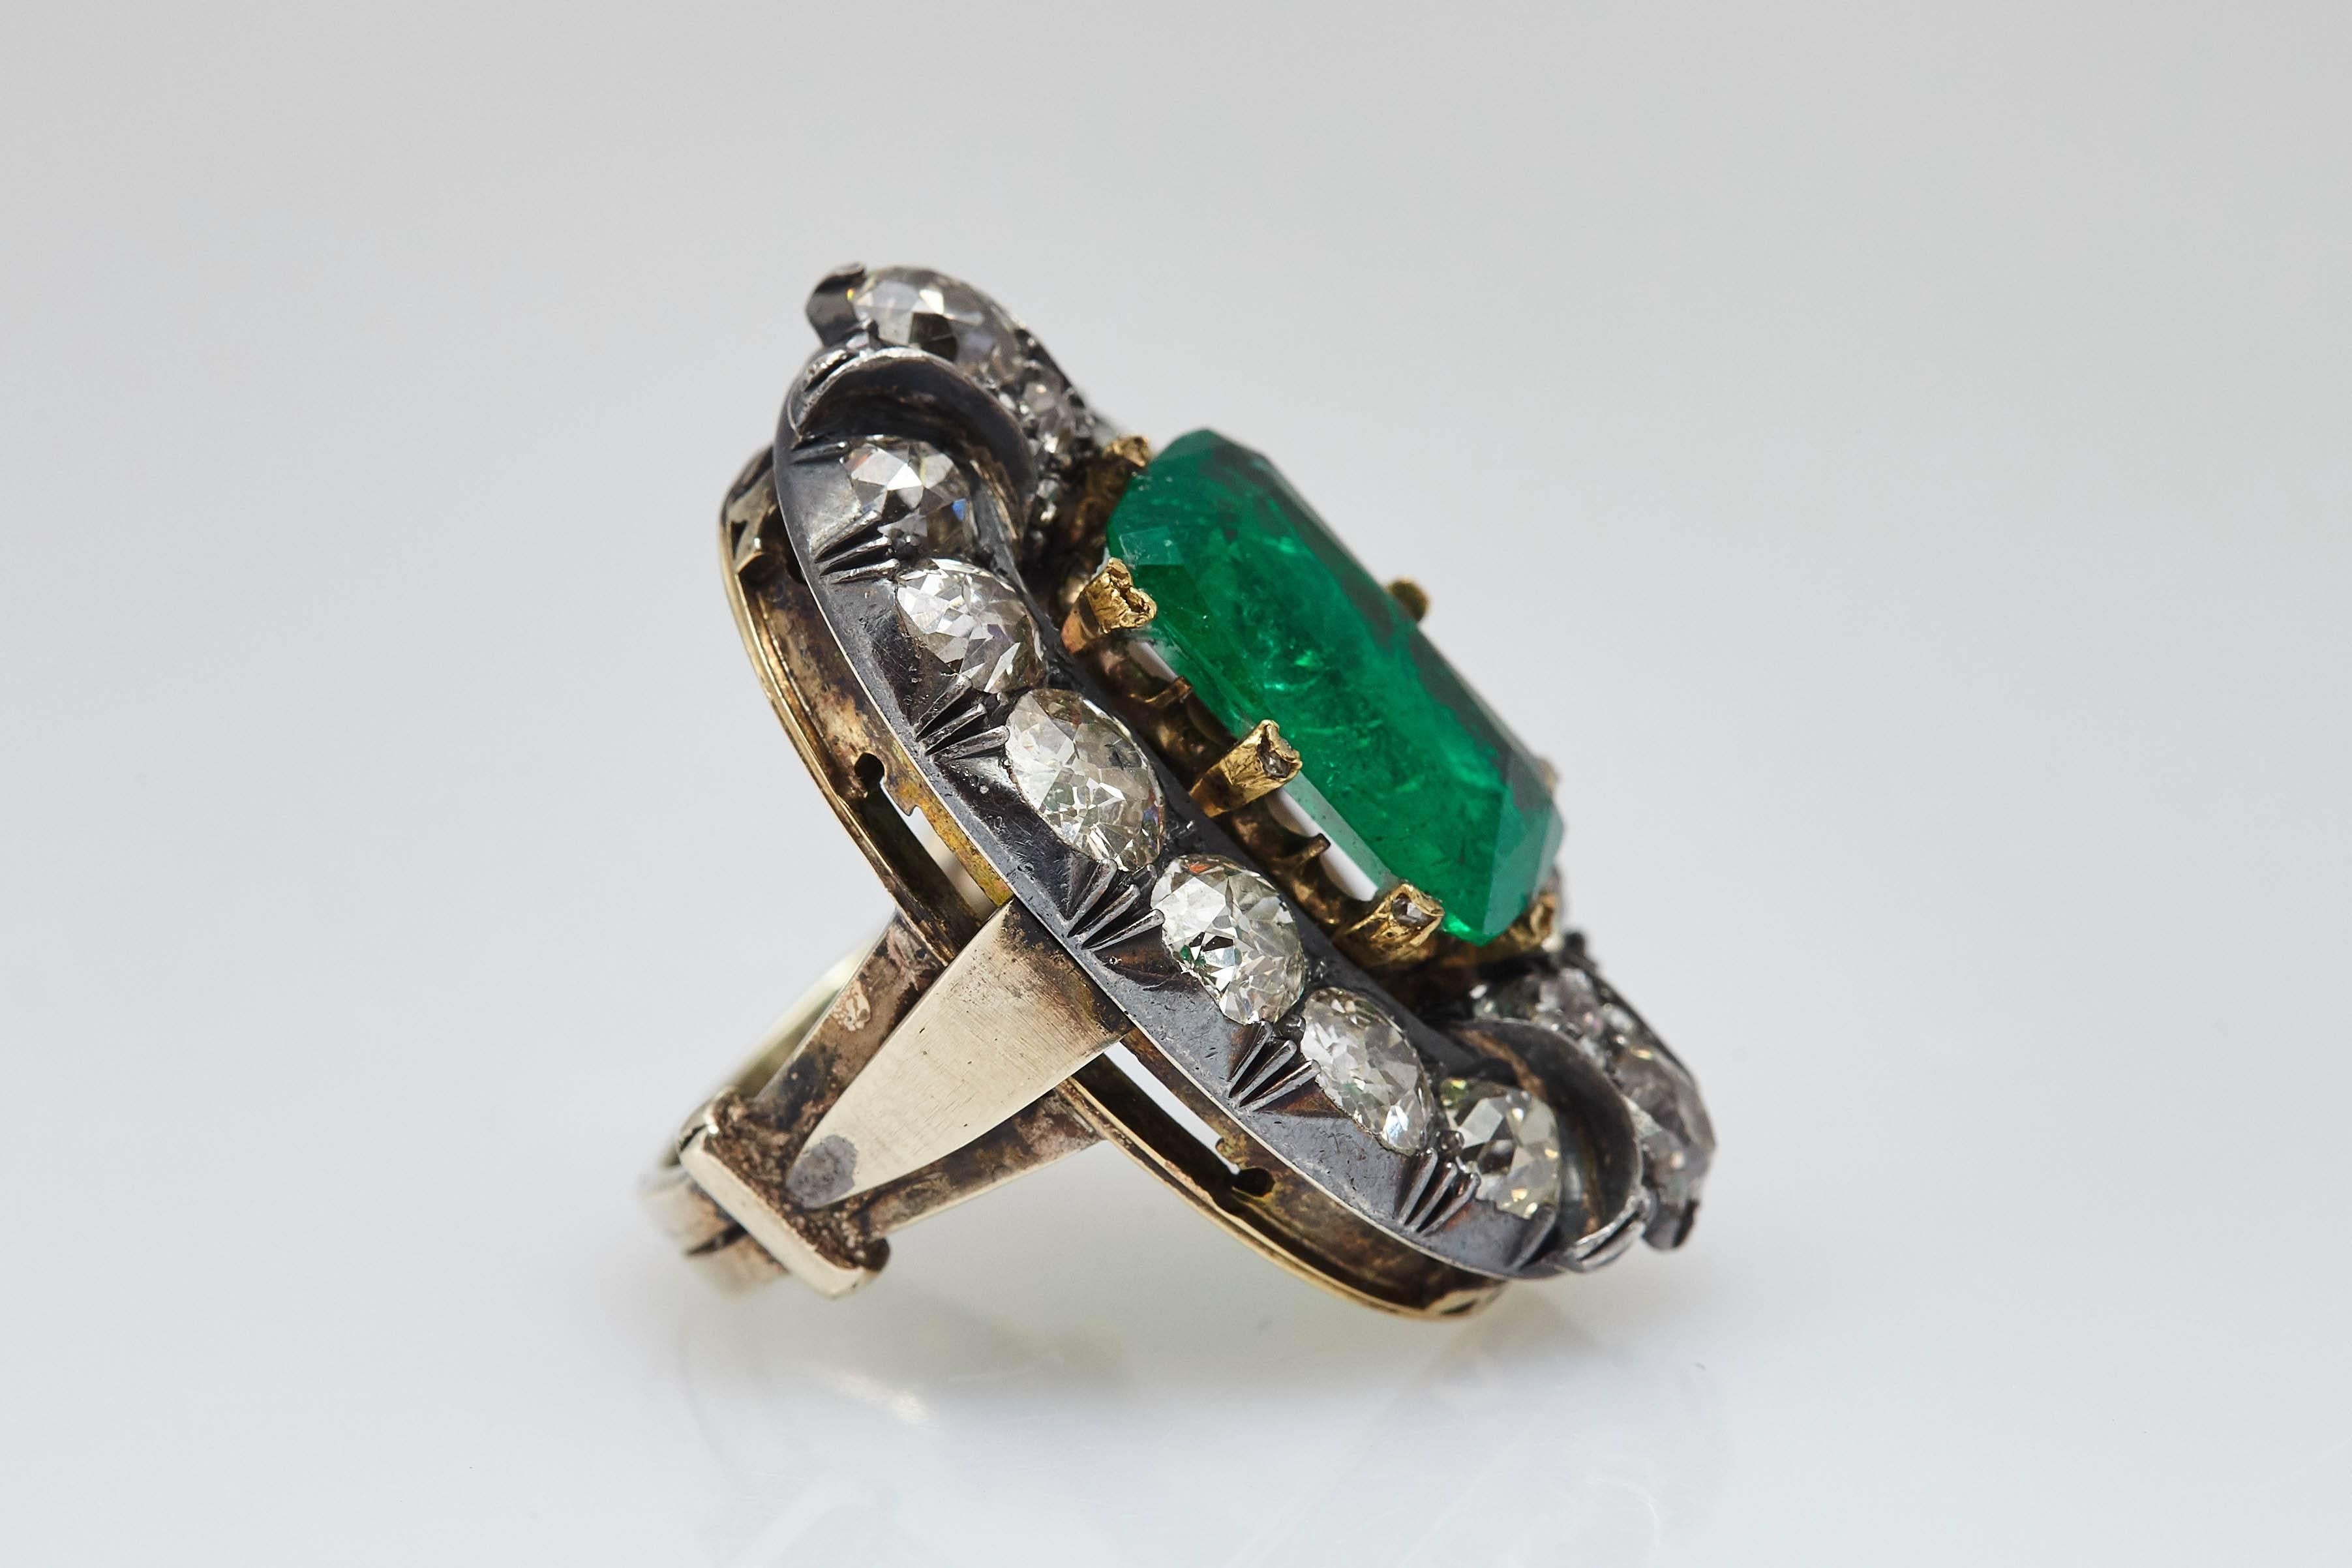 A beautiful antique diamond and Colombian emerald (4.84 carats) ring, mounted on the mixed gold and silver mounting typical of the period. Made in Italy, circa 1890.